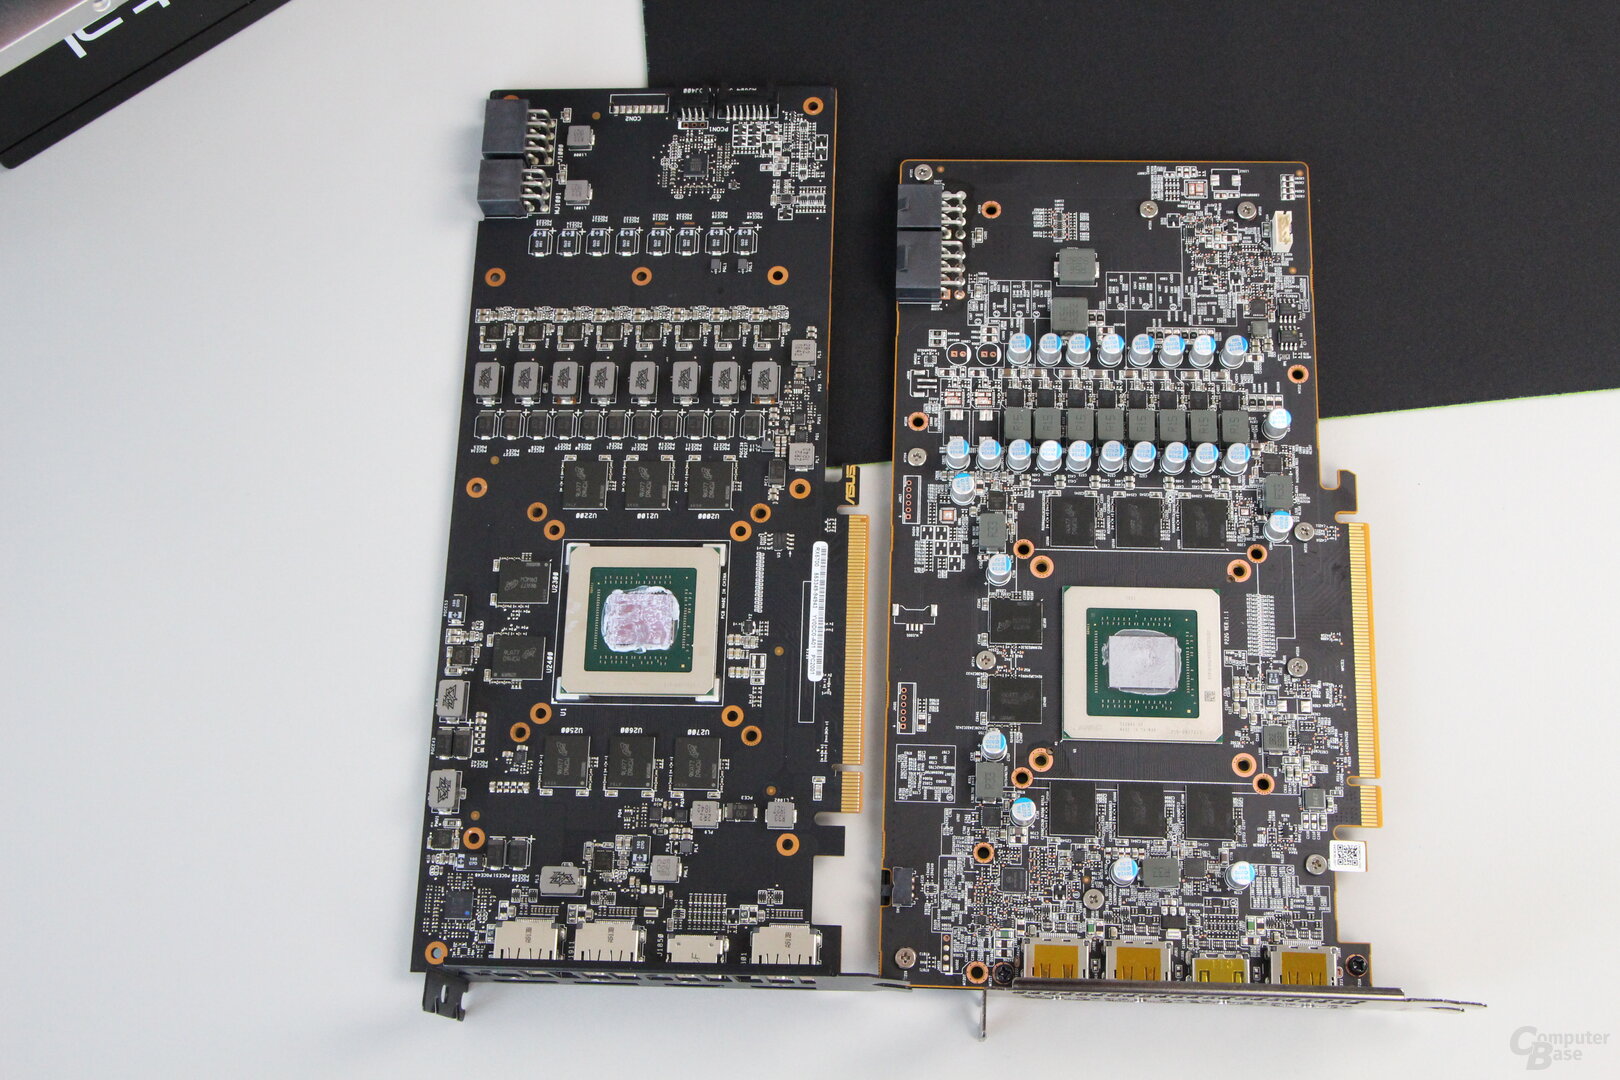 The PCB of the Asus TUF (left) and PowerColor Red Dragon (right)